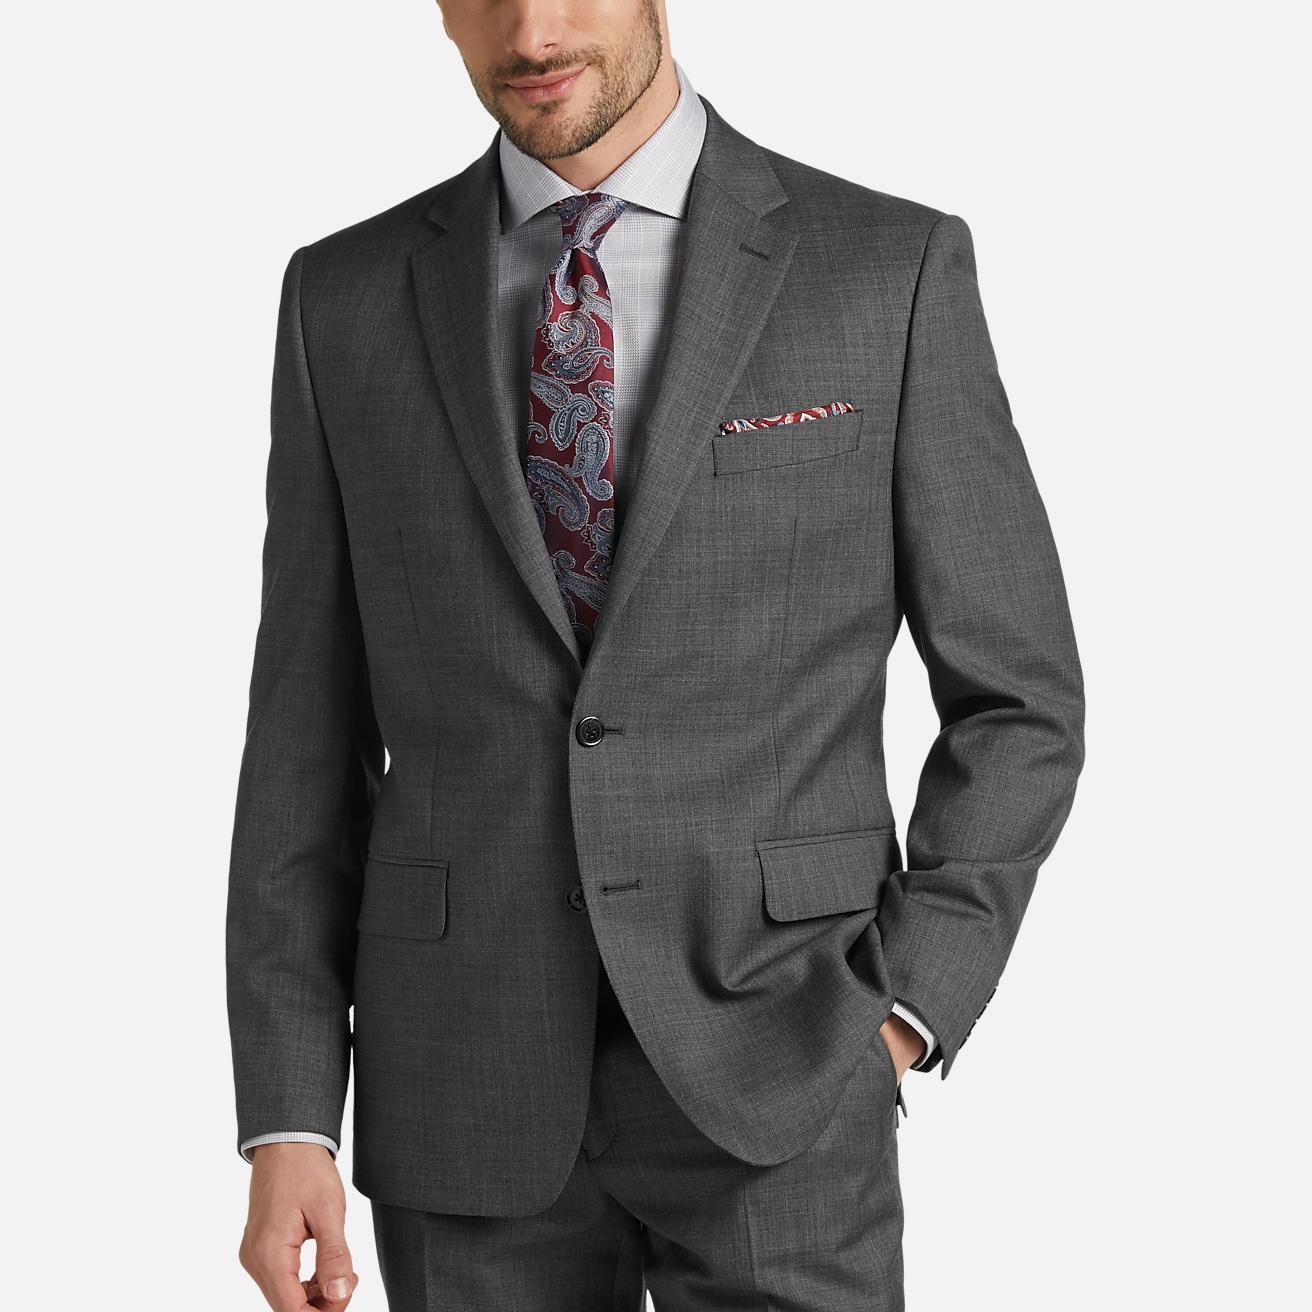 https://image.menswearhouse.com/is/image/TMW/TMW_3XAT_90_JOSEPH_ABBOUD_SUIT_SEPARATE_JACKETS_GRAY_SHARKSKIN_MAIN?imPolicy=pdp-mob-2x